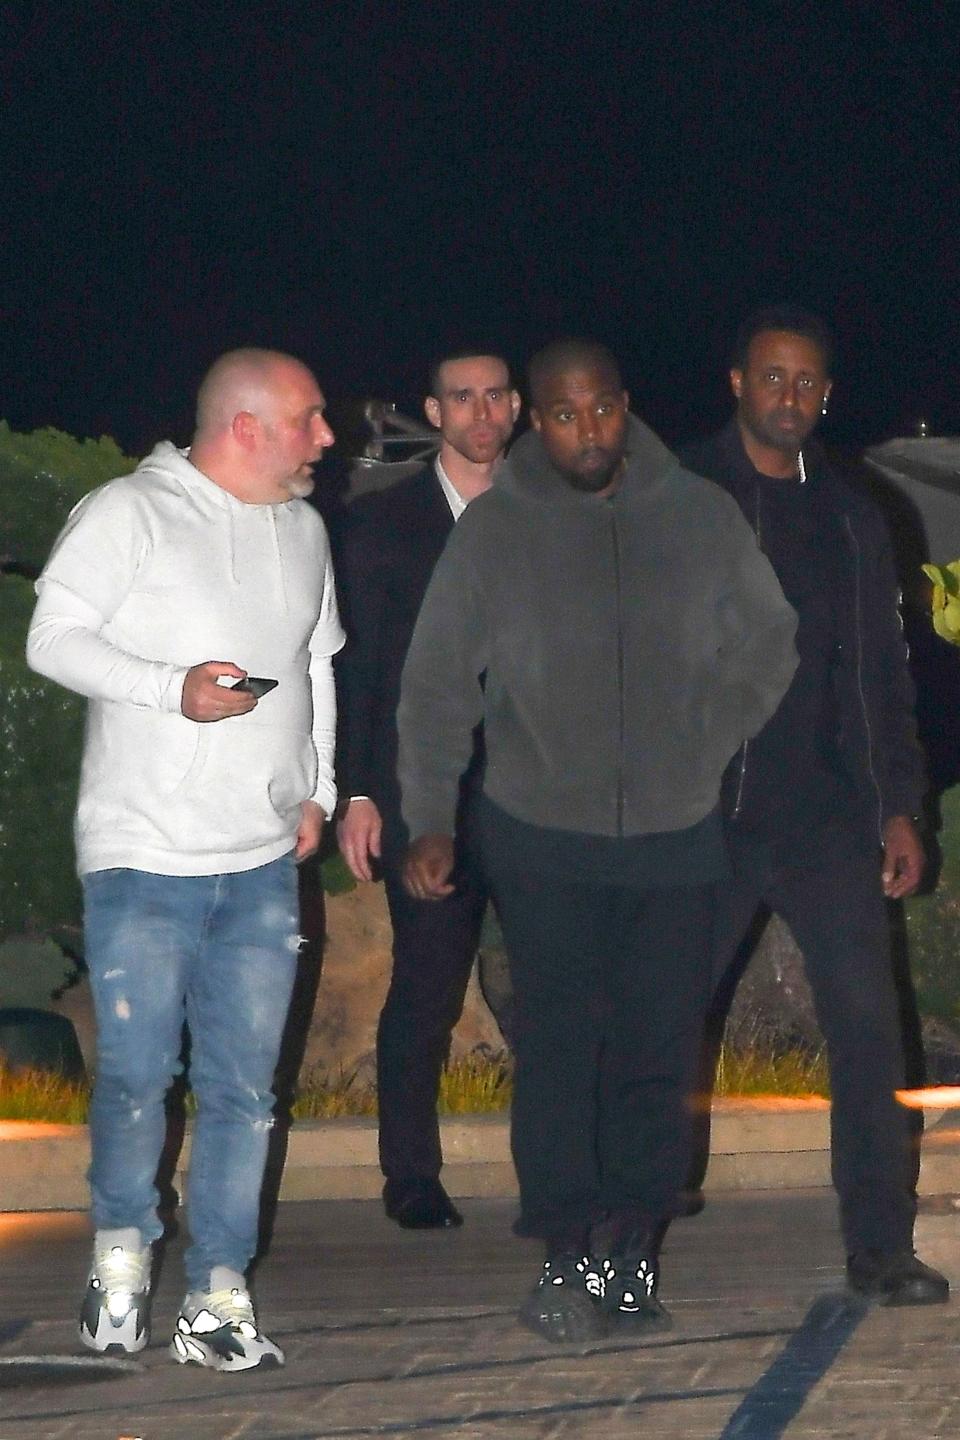 Kanye West rolls to dinner with lots of security on April 30, 2018. (Photo: Backgrid)